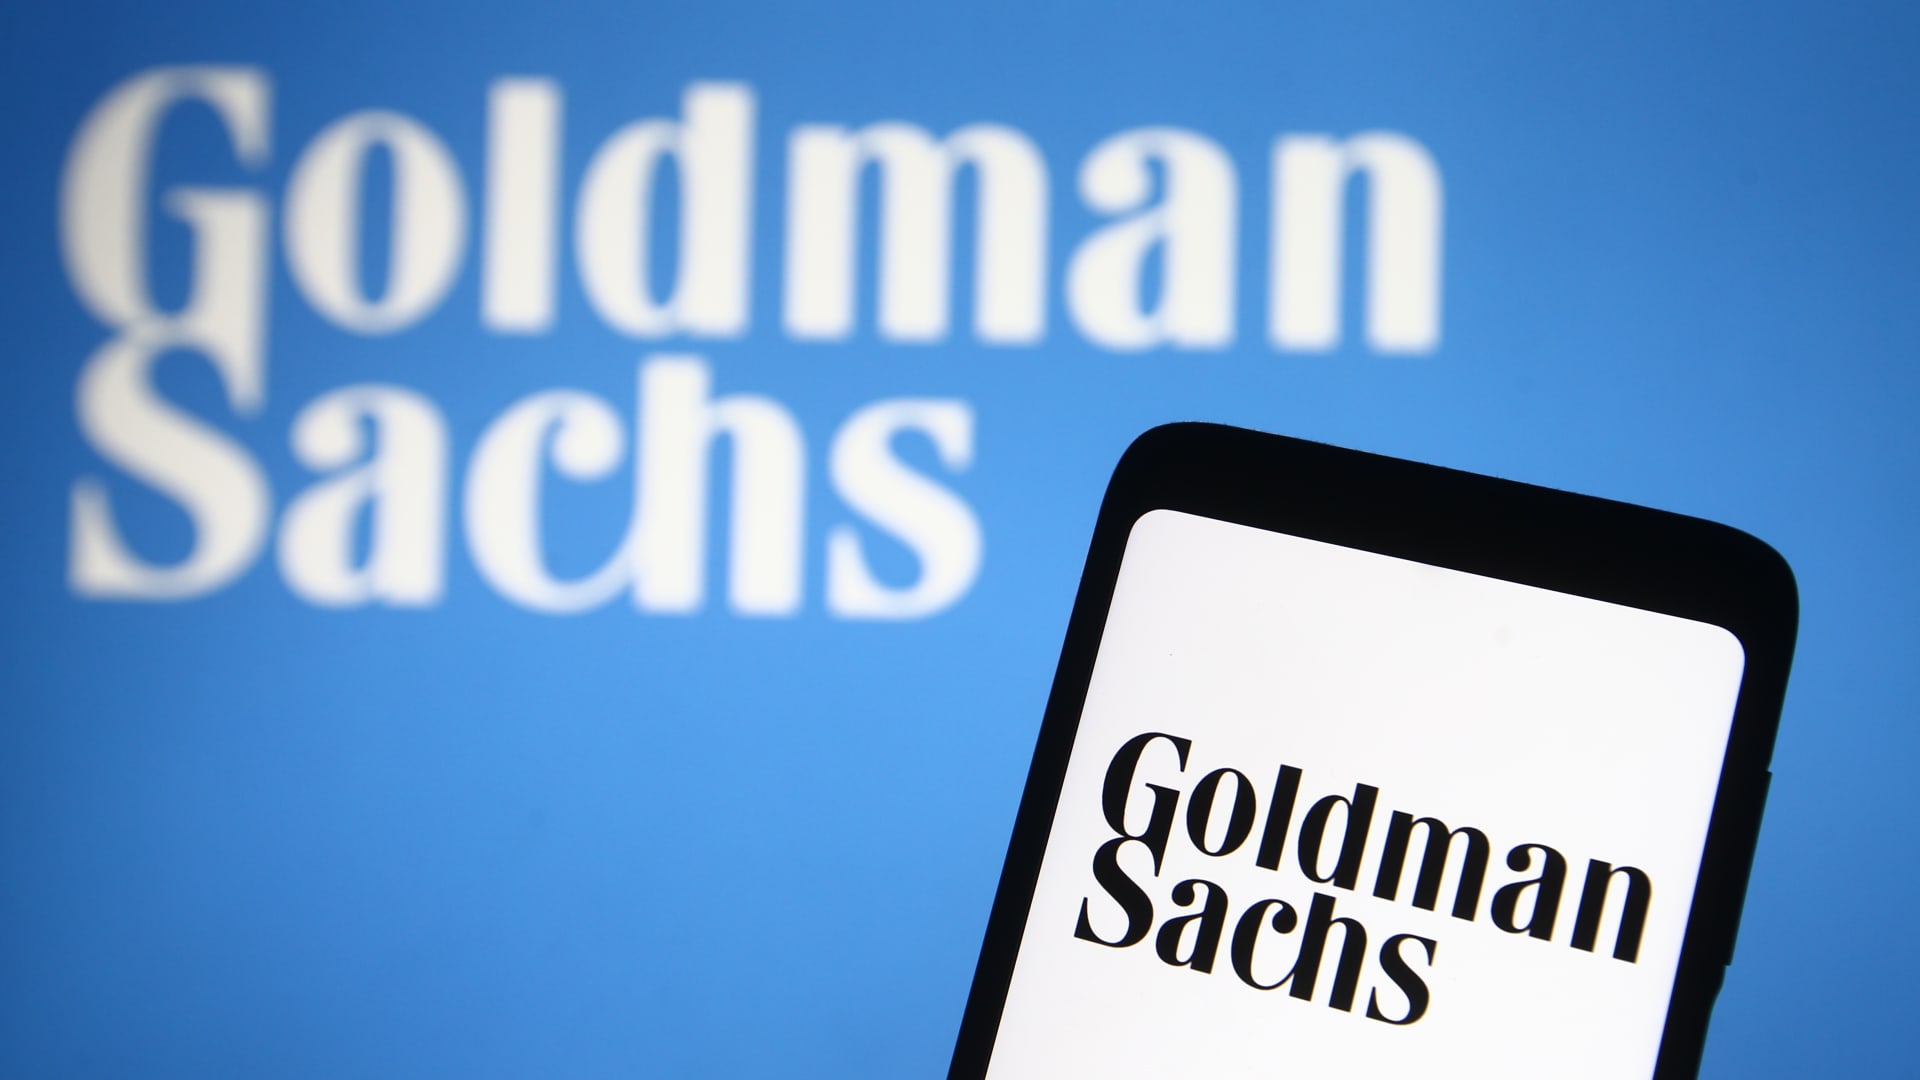 Bank of America upgrades Goldman Sachs, says it will thrive in the coming economic storm